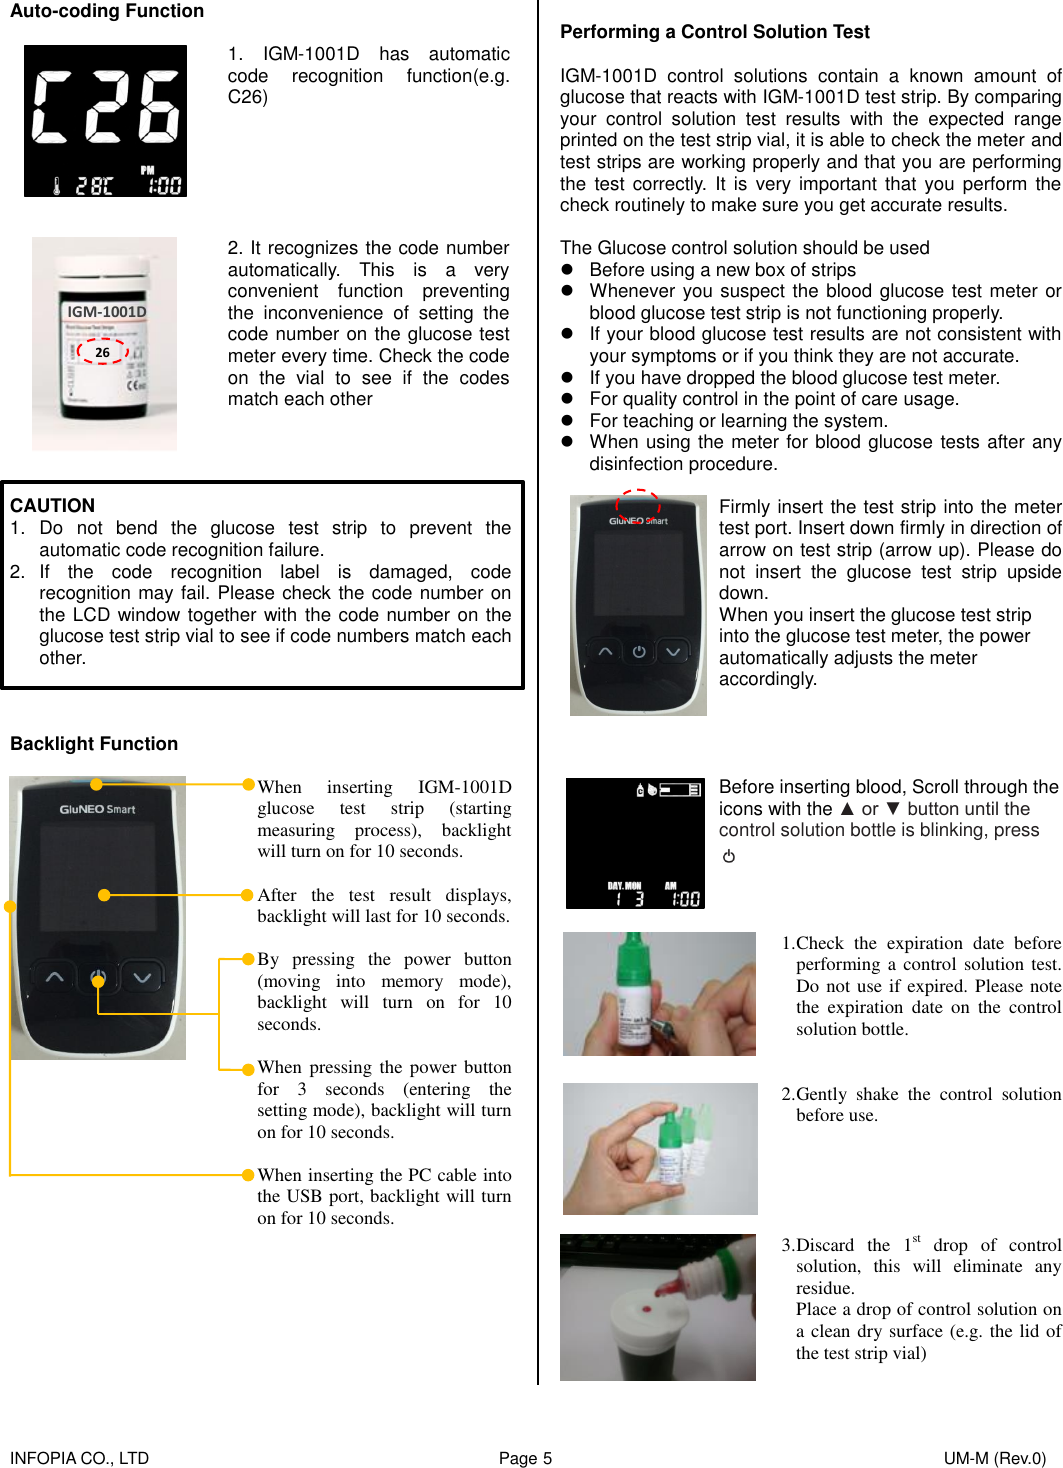    INFOPIA CO., LTD                                                                                    Page 5                                                                                              UM-M (Rev.0)  Auto-coding Function   1.  IGM-1001D  has  automatic code  recognition  function(e.g. C26)         2. It recognizes the code number automatically.  This  is  a  very convenient  function  preventing the  inconvenience  of  setting  the code number on the glucose test meter every time. Check the code on  the  vial  to  see  if  the  codes match each other     CAUTION 1.  Do  not  bend  the  glucose  test  strip  to  prevent  the automatic code recognition failure. 2.  If  the  code  recognition  label  is  damaged,  code recognition may fail. Please check the code number on the LCD window together with the code number on the glucose test strip vial to see if code numbers match each other.      Backlight Function    When  inserting  IGM-1001D glucose  test  strip  (starting measuring  process),  backlight will turn on for 10 seconds.  After  the  test  result  displays, backlight will last for 10 seconds.    By  pressing  the  power  button (moving  into  memory  mode), backlight  will  turn  on  for  10 seconds.  When  pressing  the power  button for  3  seconds  (entering  the setting mode), backlight will turn on for 10 seconds.  When inserting the PC cable into the USB port, backlight will turn on for 10 seconds.         Performing a Control Solution Test  IGM-1001D  control  solutions  contain  a  known  amount  of glucose that reacts with IGM-1001D test strip. By comparing your  control  solution  test  results  with  the  expected  range printed on the test strip vial, it is able to check the meter and test strips are working properly and that you are performing the  test correctly.  It  is  very  important that  you  perform the check routinely to make sure you get accurate results.  The Glucose control solution should be used   Before using a new box of strips   Whenever you suspect the blood glucose test meter or blood glucose test strip is not functioning properly.   If your blood glucose test results are not consistent with your symptoms or if you think they are not accurate.   If you have dropped the blood glucose test meter.   For quality control in the point of care usage.   For teaching or learning the system.   When using the meter for blood glucose tests after any disinfection procedure.   Firmly insert the test strip into the meter test port. Insert down firmly in direction of arrow on test strip (arrow up). Please do not  insert  the  glucose  test  strip  upside down.   When you insert the glucose test strip into the glucose test meter, the power automatically adjusts the meter accordingly.      Before inserting blood, Scroll through the icons with the ▲ or ▼ button until the control solution bottle is blinking, press      1. Check  the  expiration  date  before performing a control solution test. Do not use if expired. Please note the  expiration  date  on  the  control solution bottle.    2. Gently  shake  the  control  solution before use.       3. Discard  the  1st  drop  of  control solution,  this  will  eliminate  any residue. Place a drop of control solution on a clean dry surface (e.g. the lid of the test strip vial)  26 IGM-1001D 